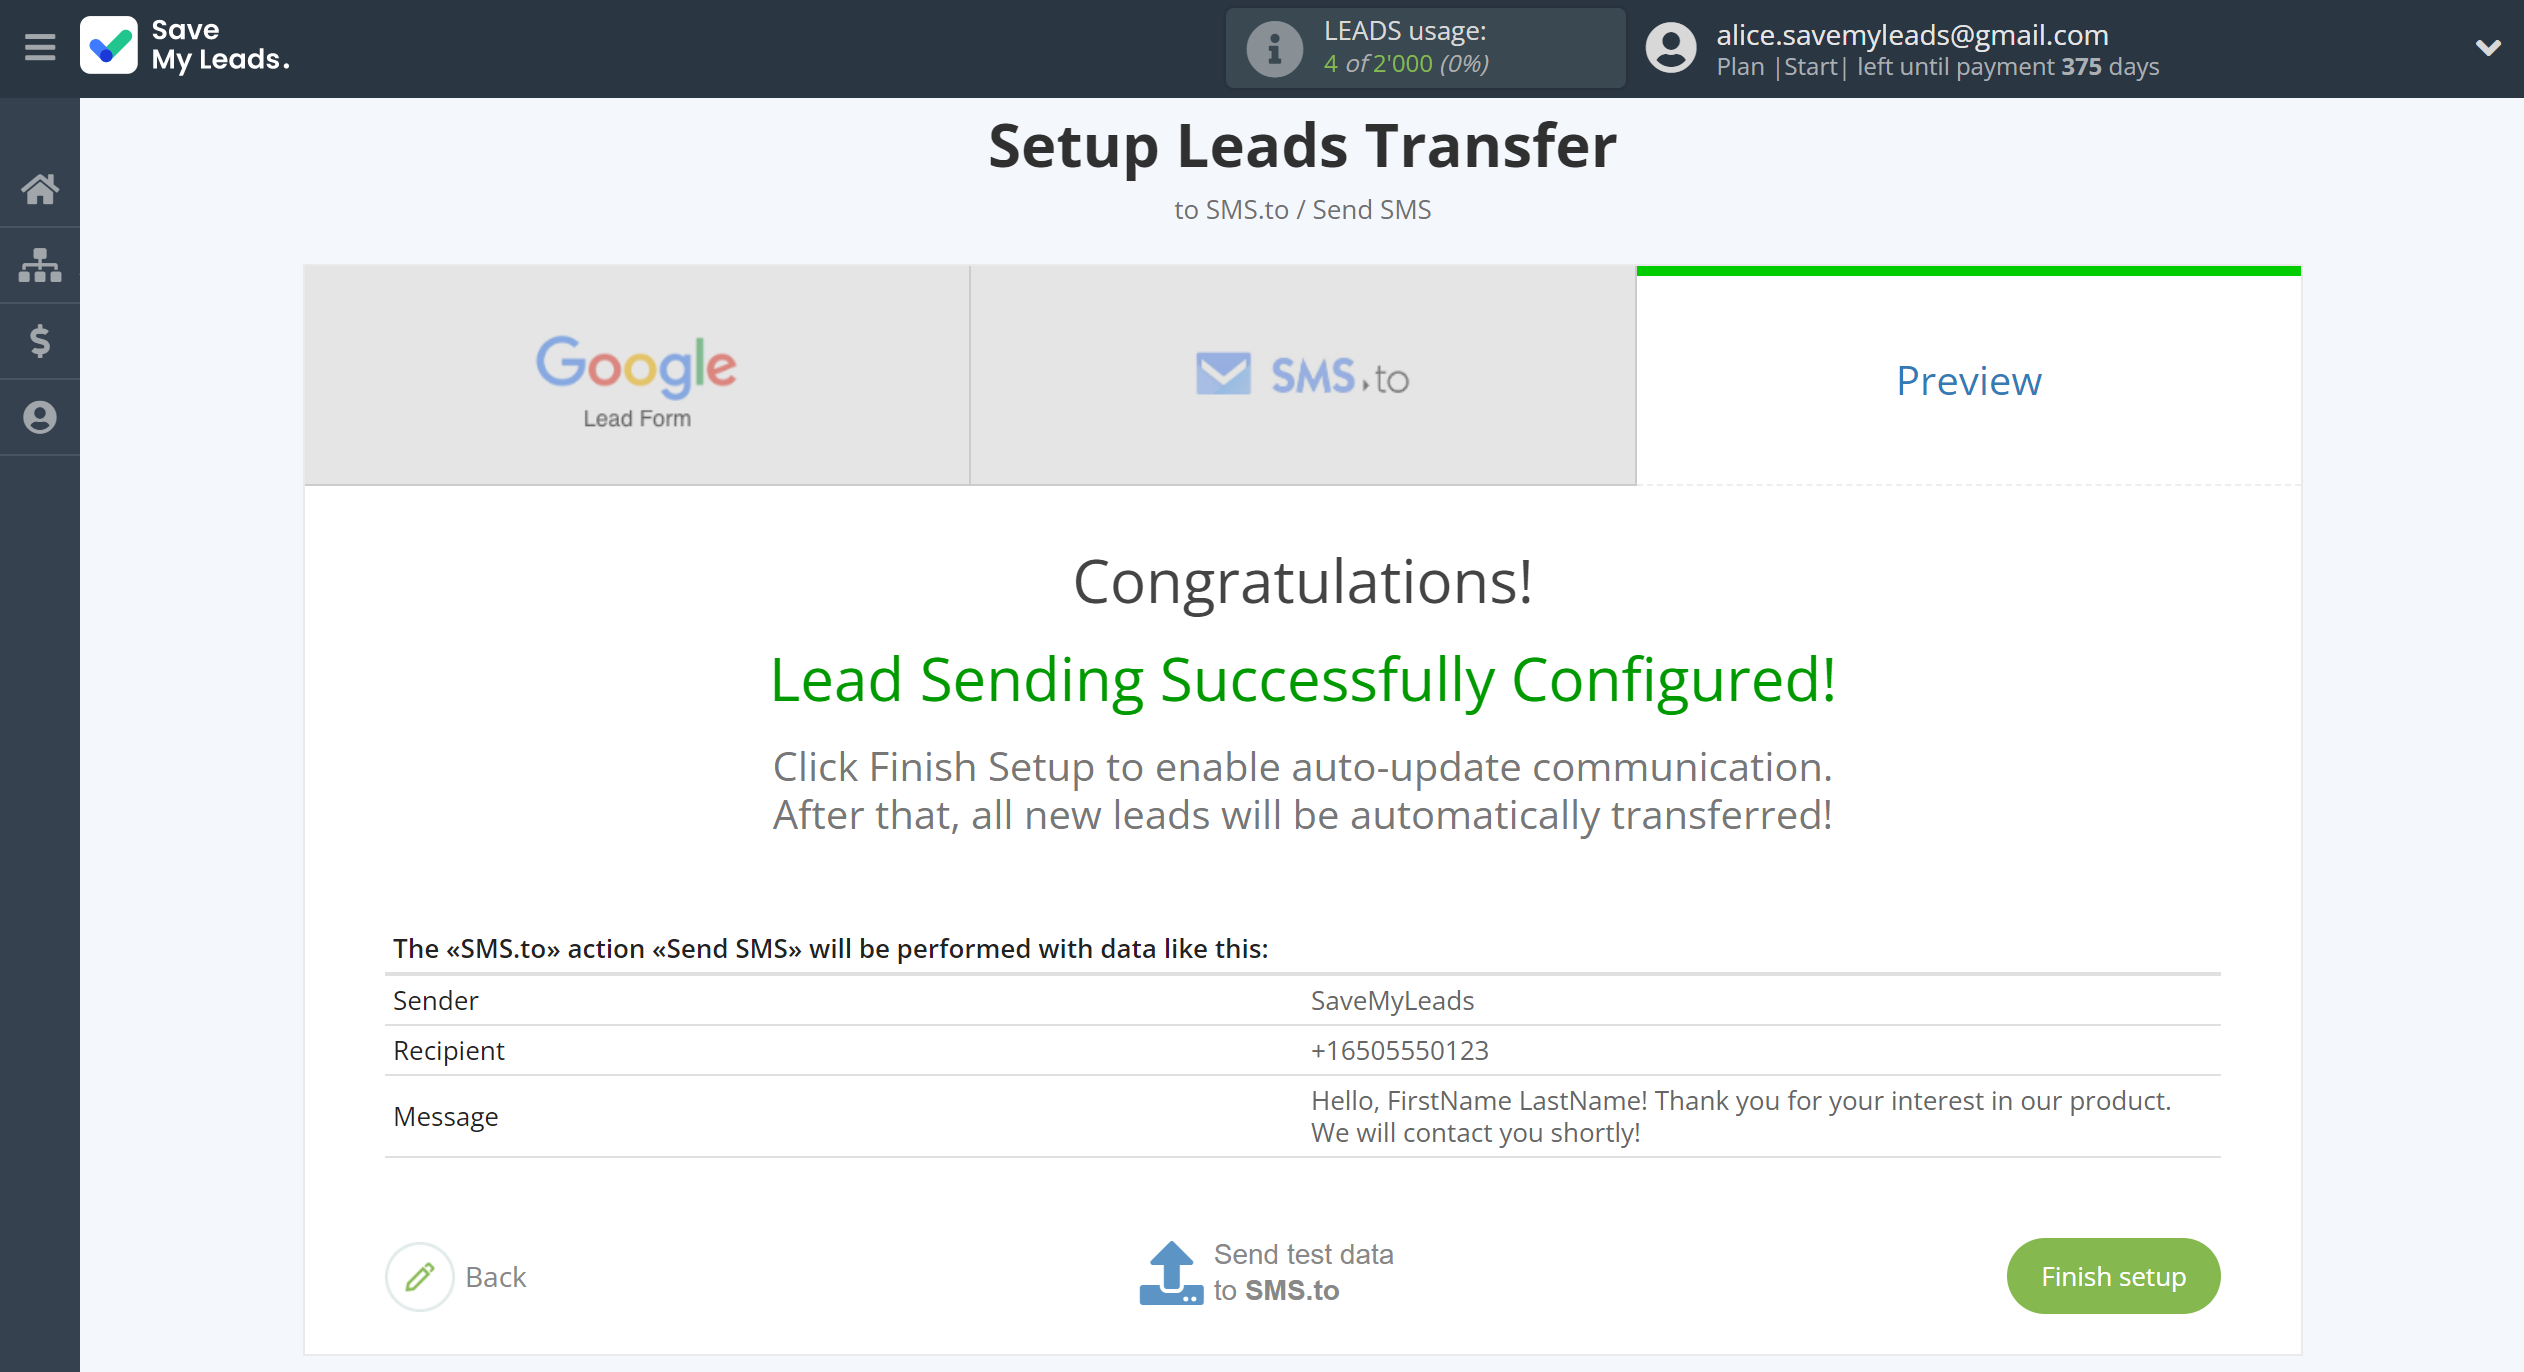 How to Connect Google Lead Form with SMS.to | Test data